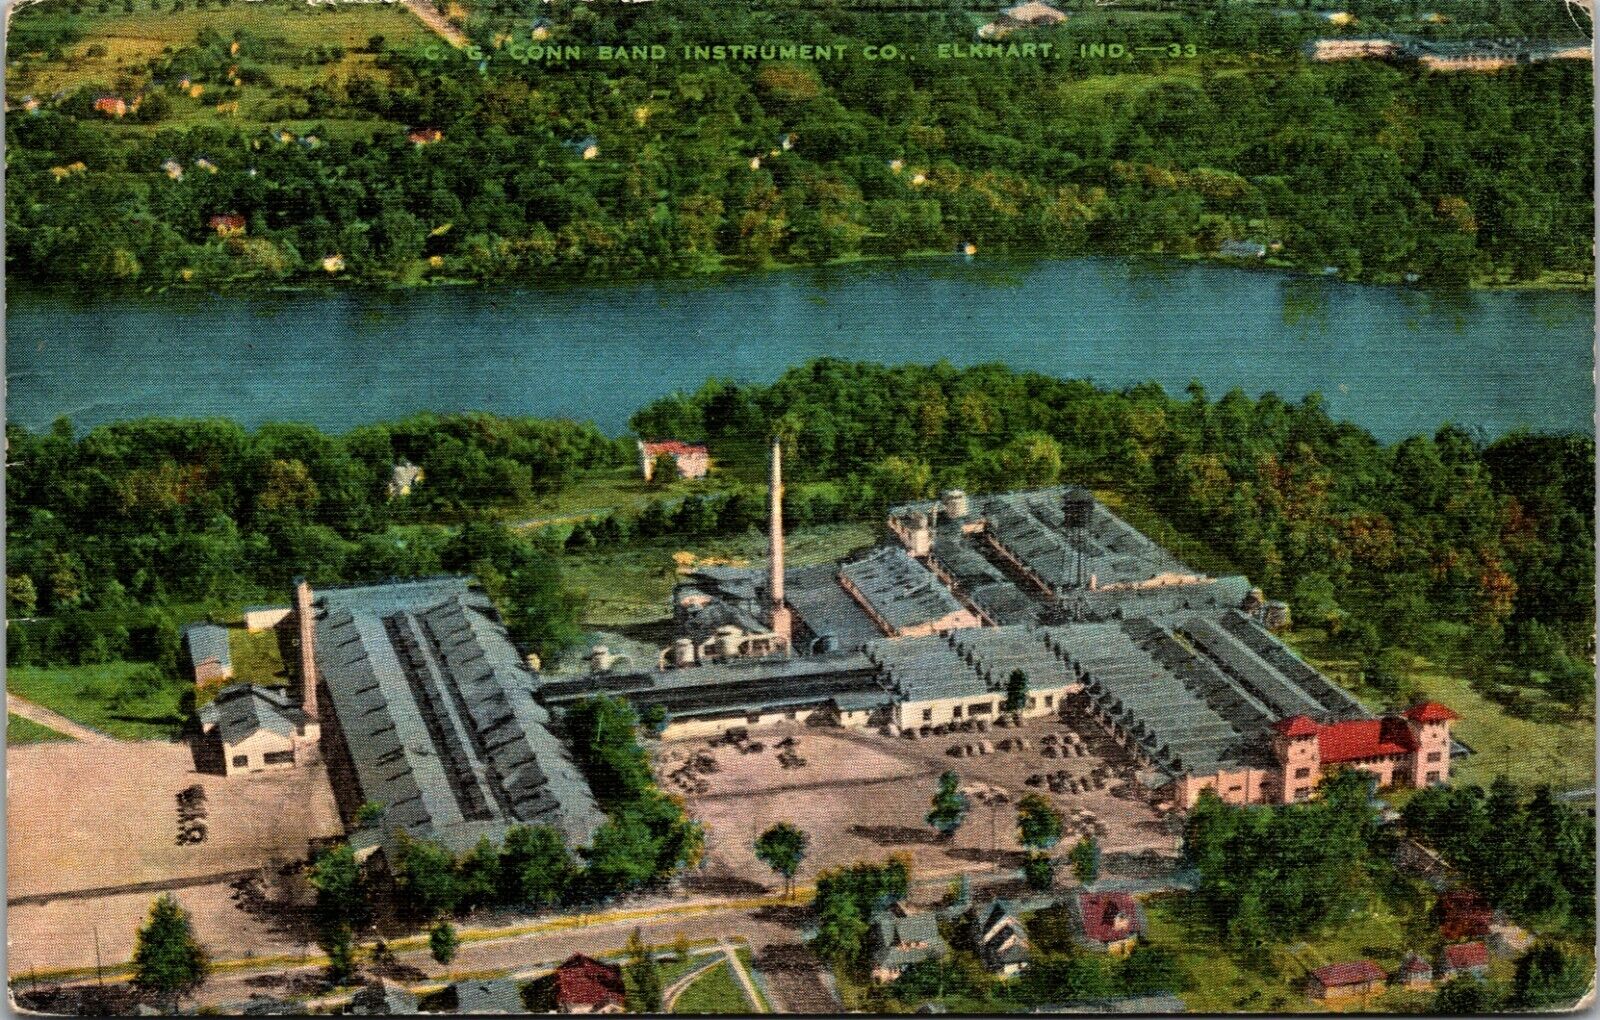 Elkhart Indiana IN Aerial View CG Conn Band Instrument Company Postcard 